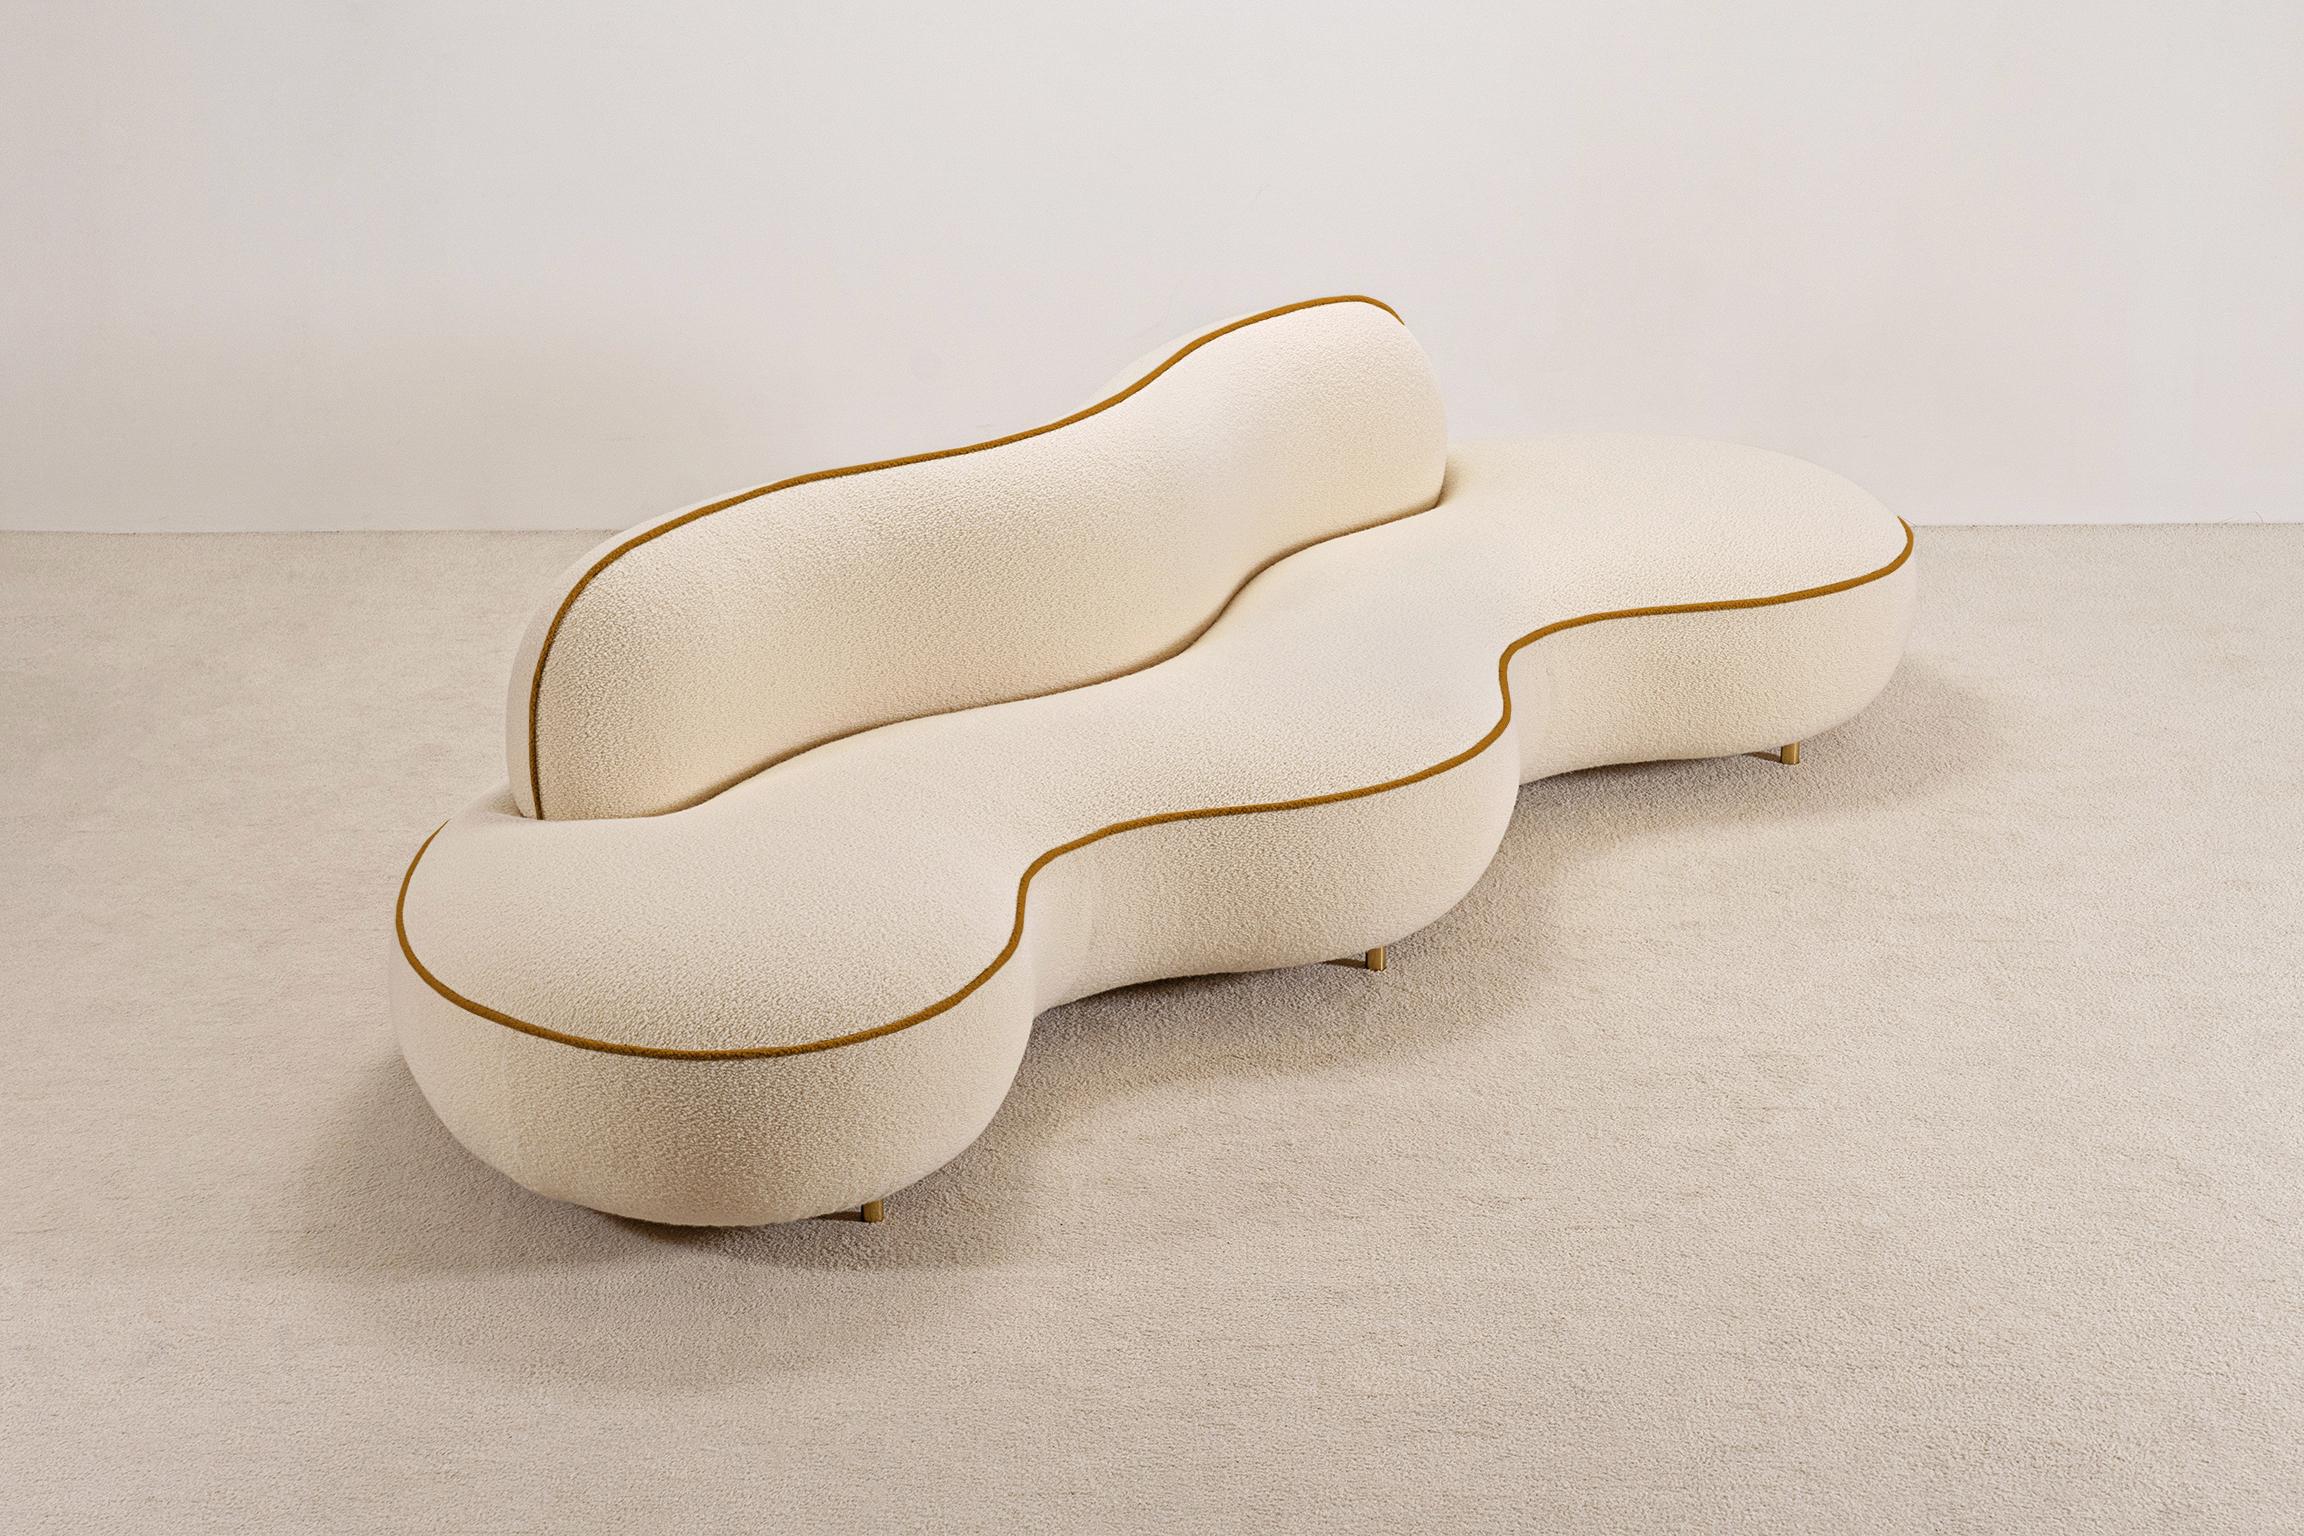 Jim Sofa by Proisy Studio. 

Jim is an elegant and refined 3 to 4 seater curved sofa designed by Proisy Studio. This piece is a part of a collection named 